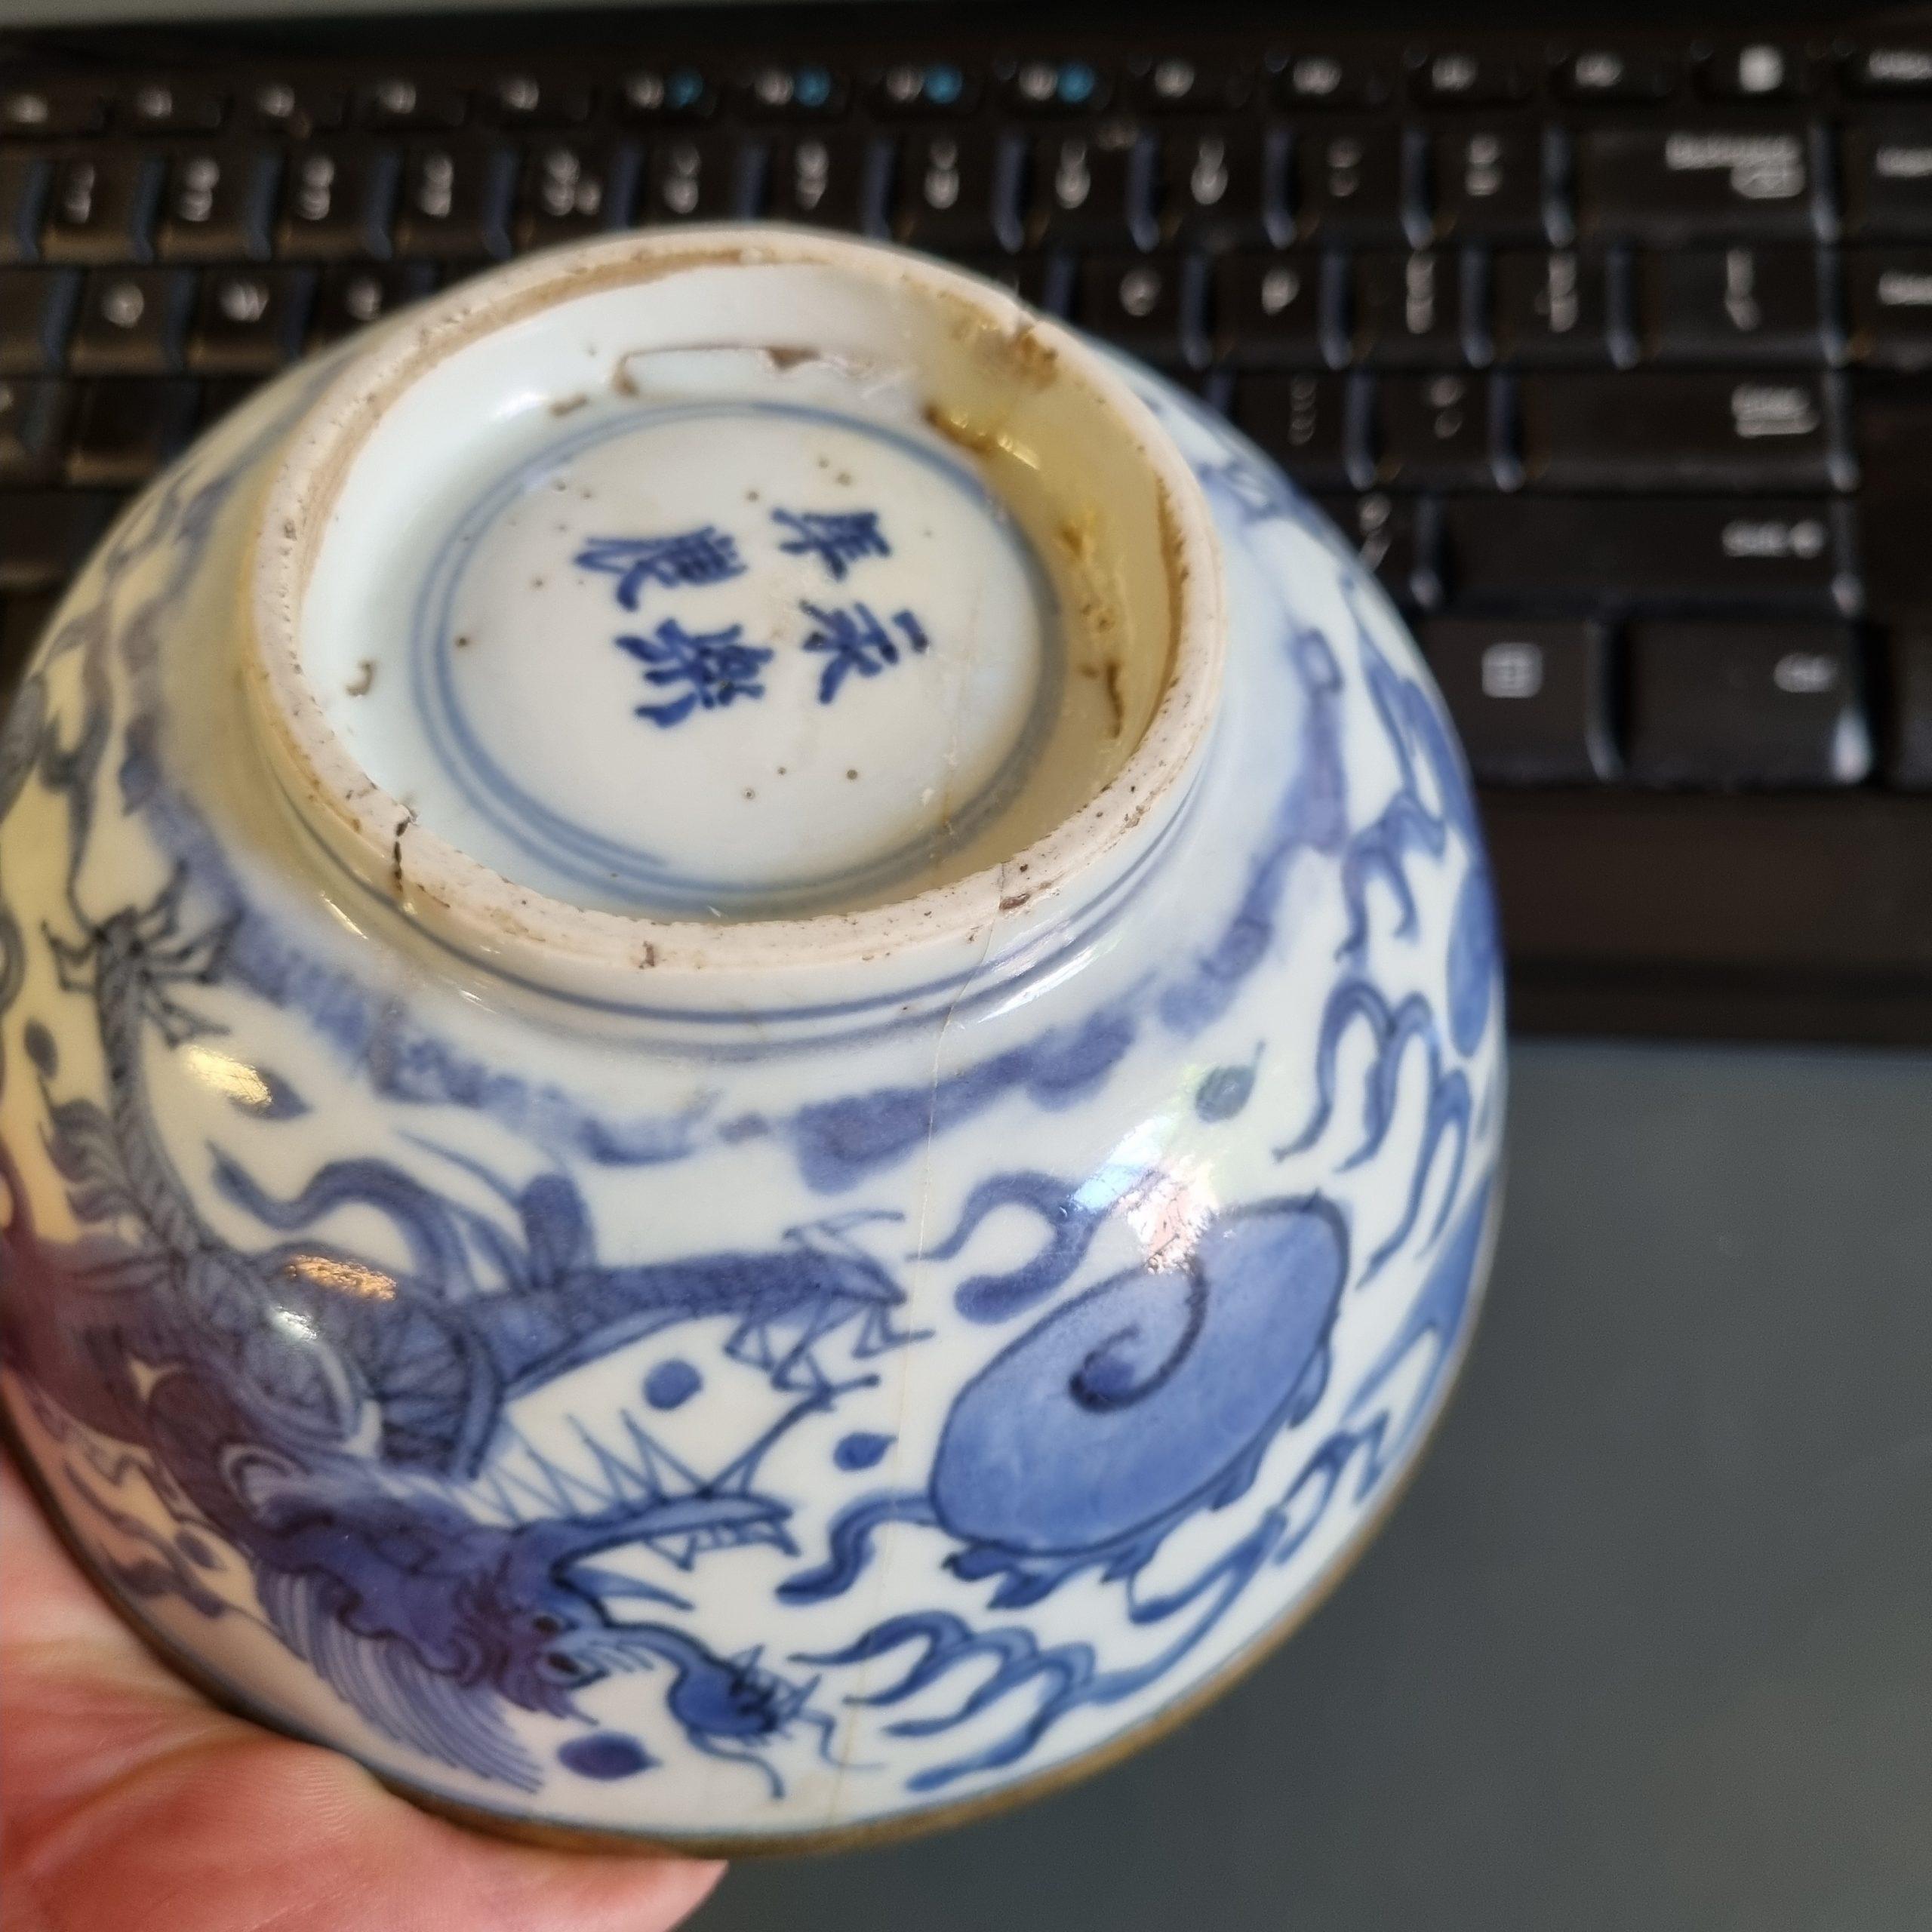 17th Century Ming Period Chinese Porcelain Blue White Bowl Dragons Marked 1